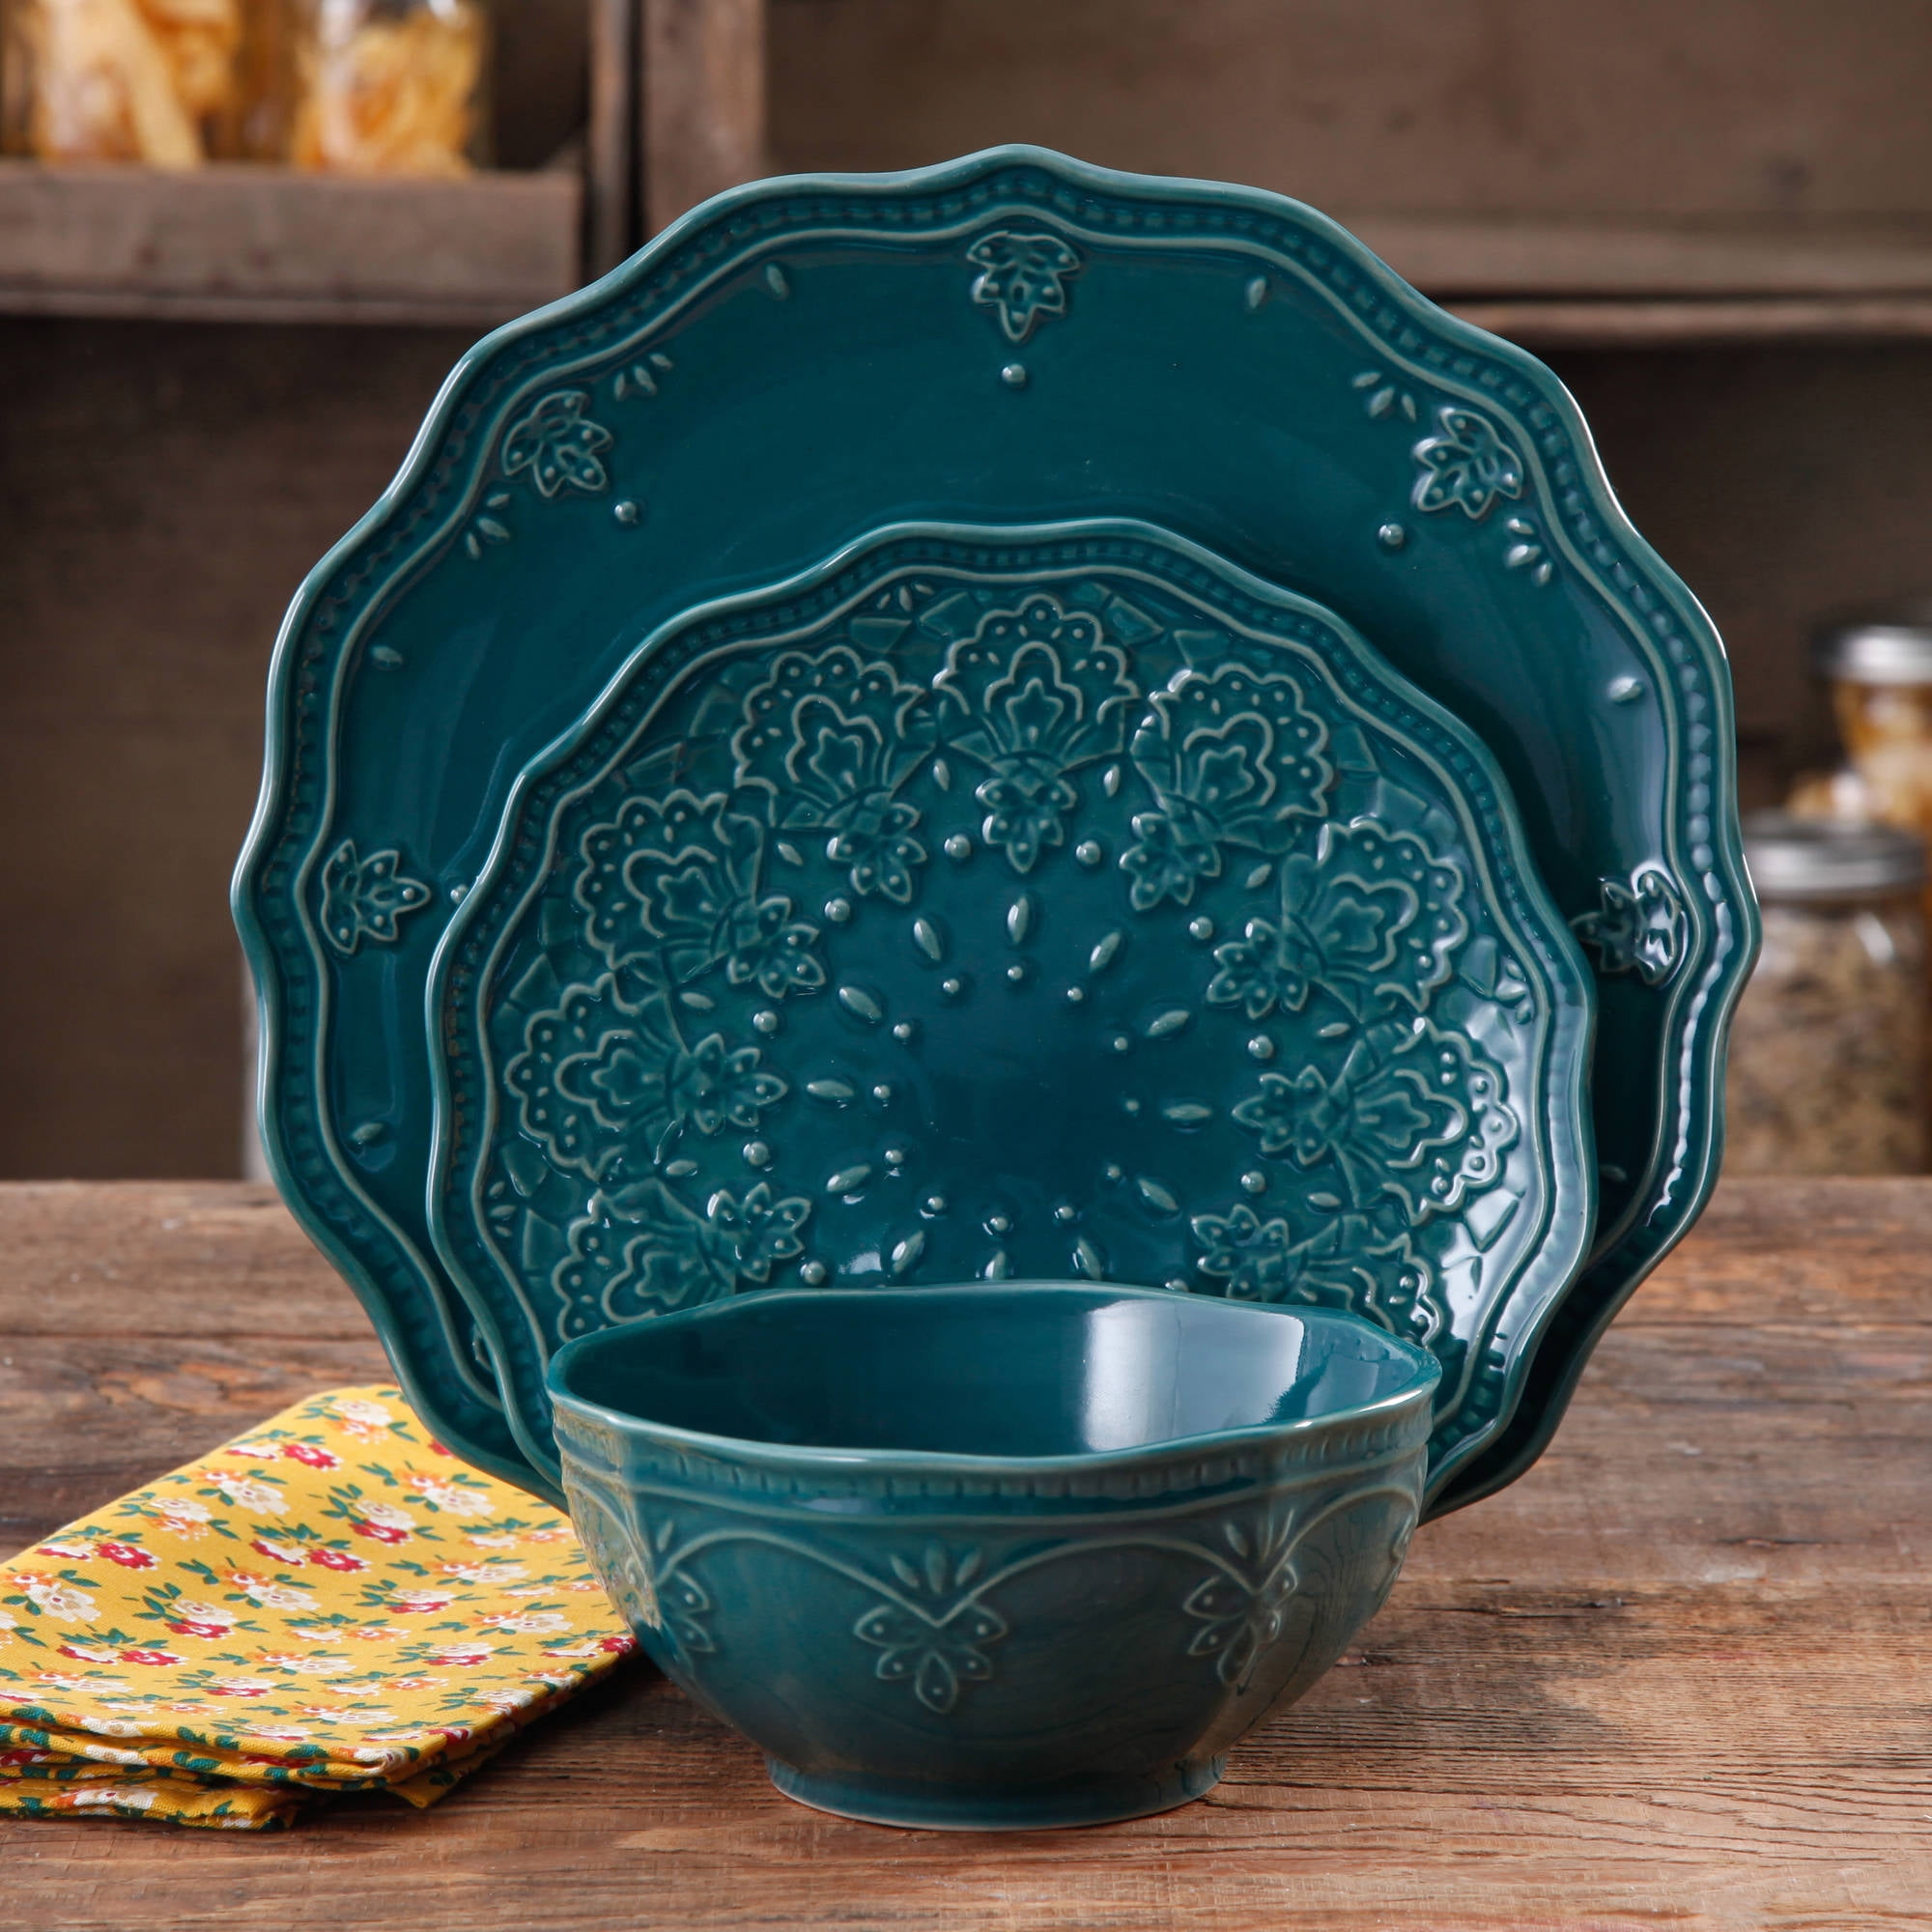 Teal The Pioneer Woman Cowgirl Lace 12-Piece Dinnerware Set 